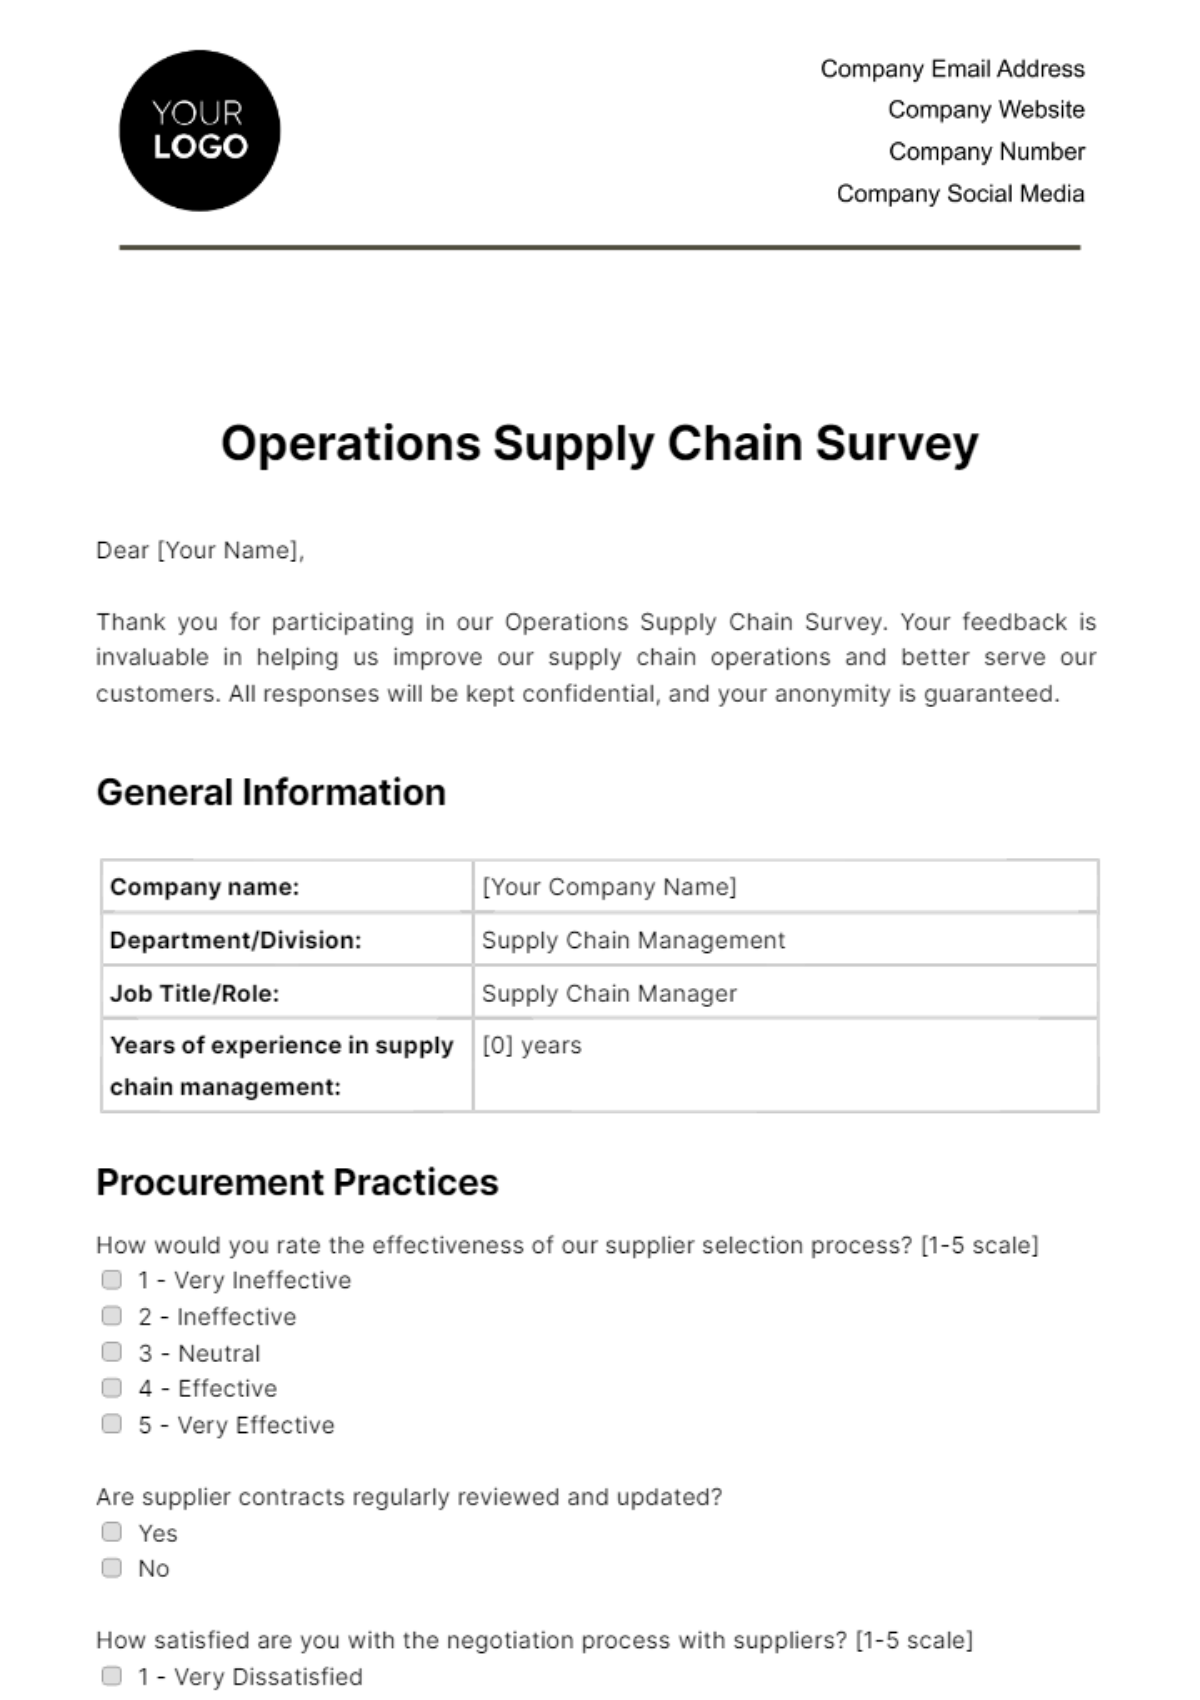 Operations Supply Chain Survey Template